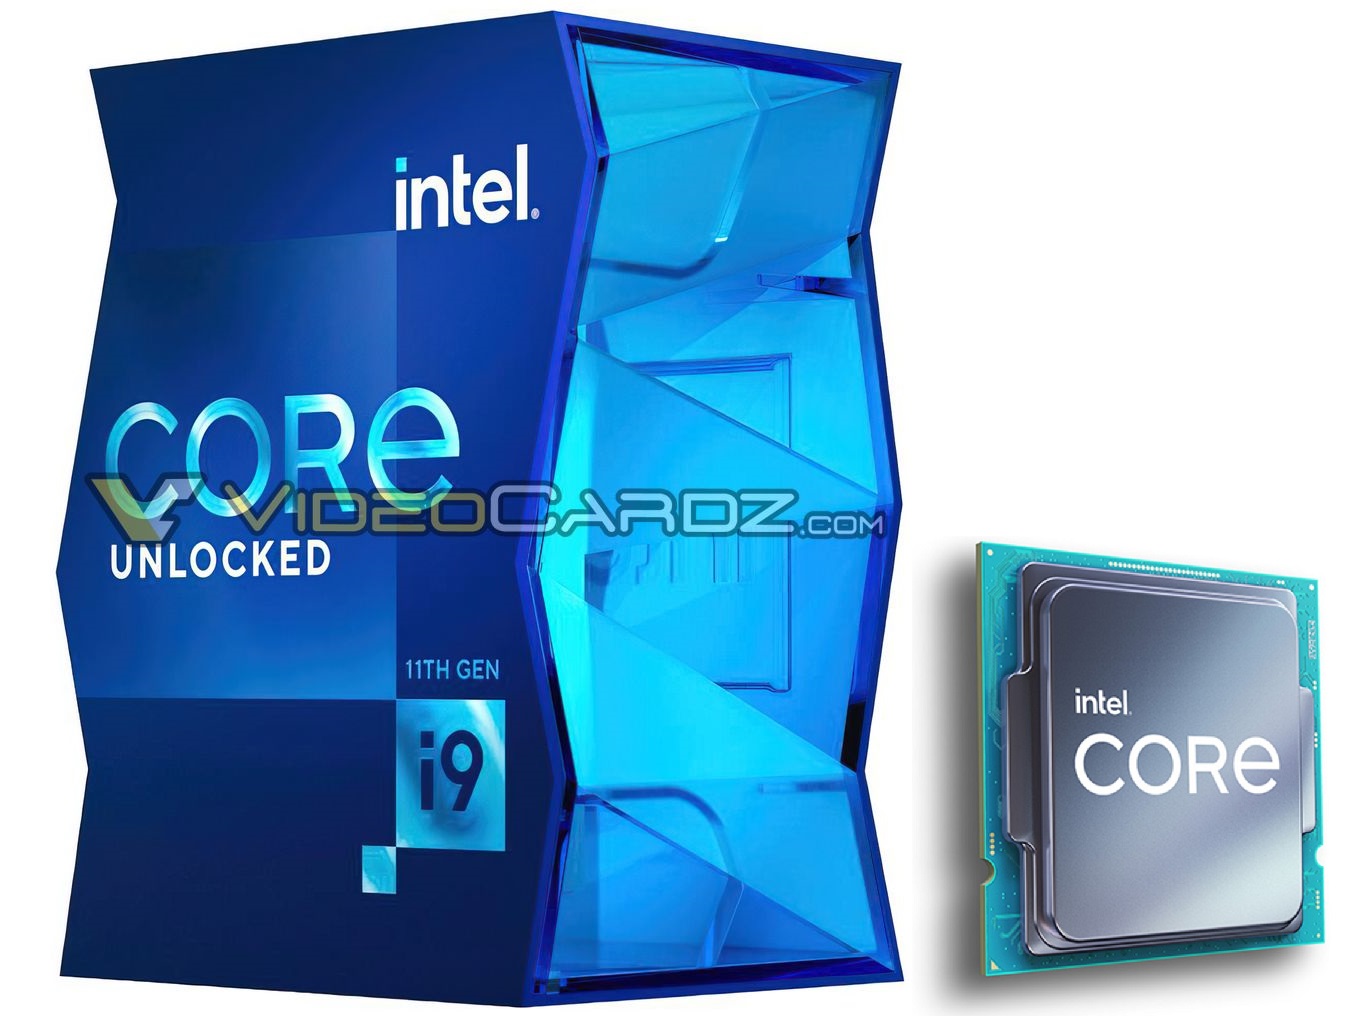 Images of Rocket Lake Intel Core i9 packaging leaked: The i9 